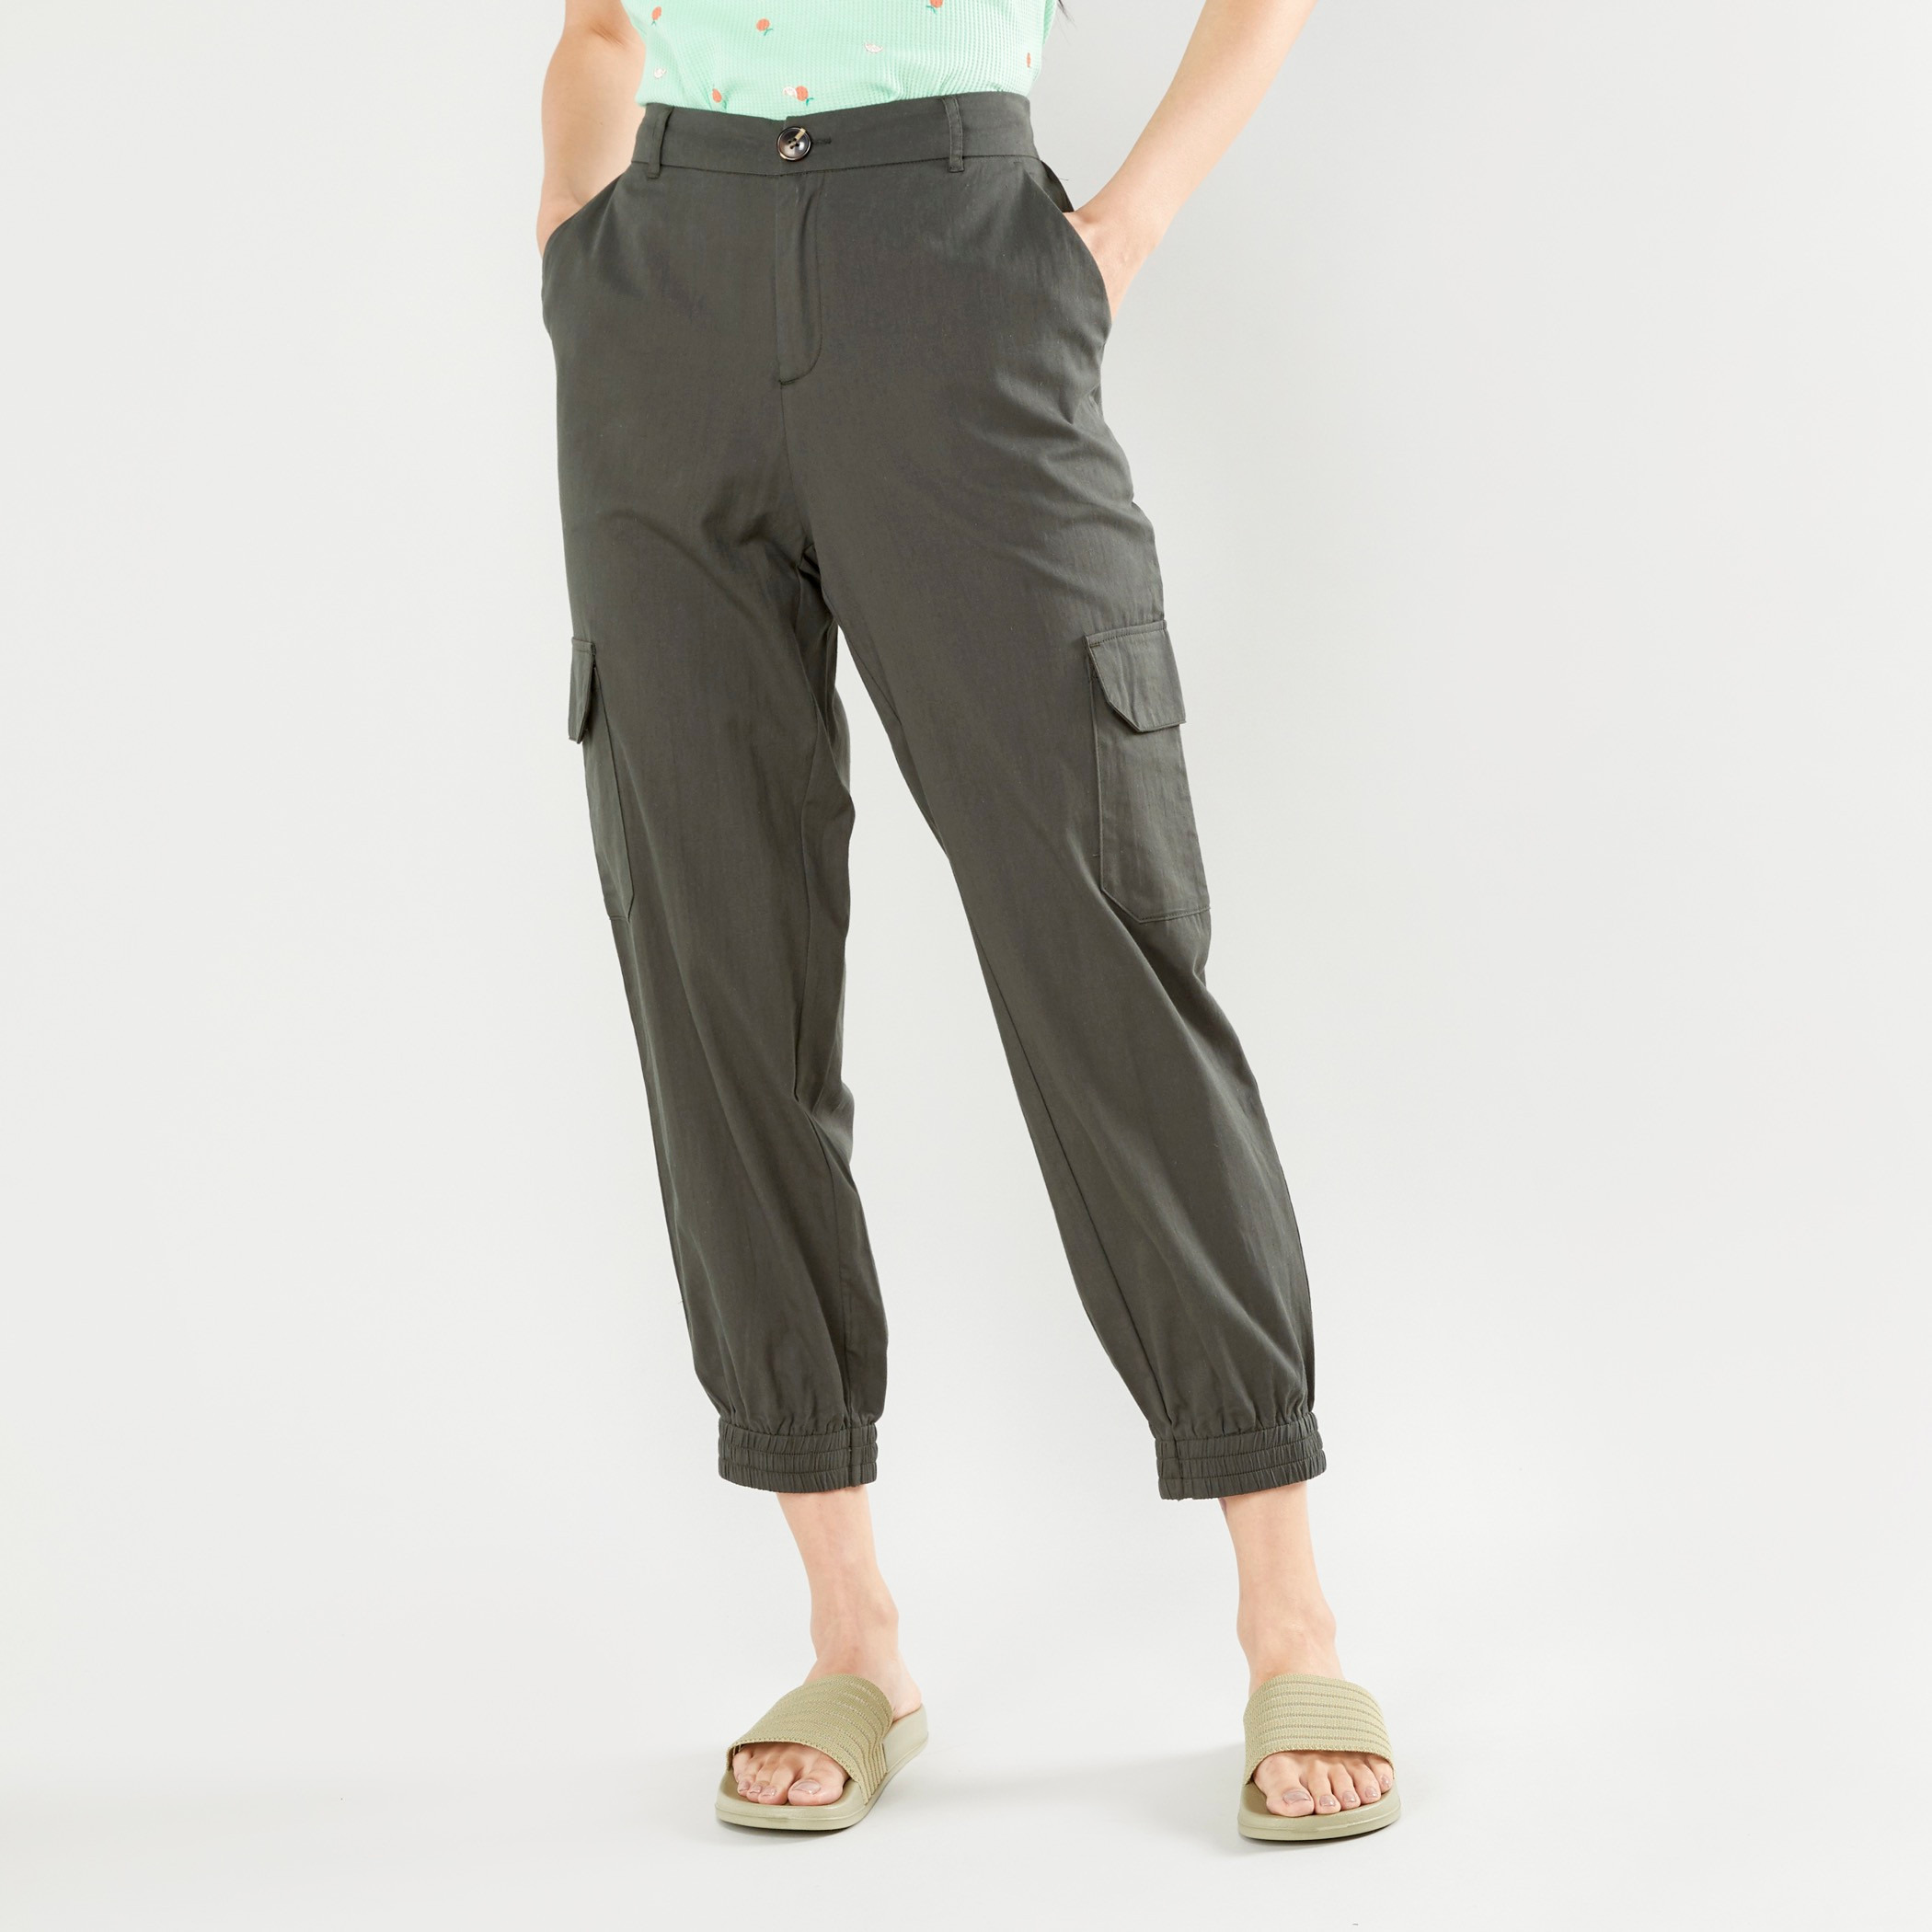 Amy's Creative Pursuits: How To Quickly And Easily Add Belt Loops To Pants